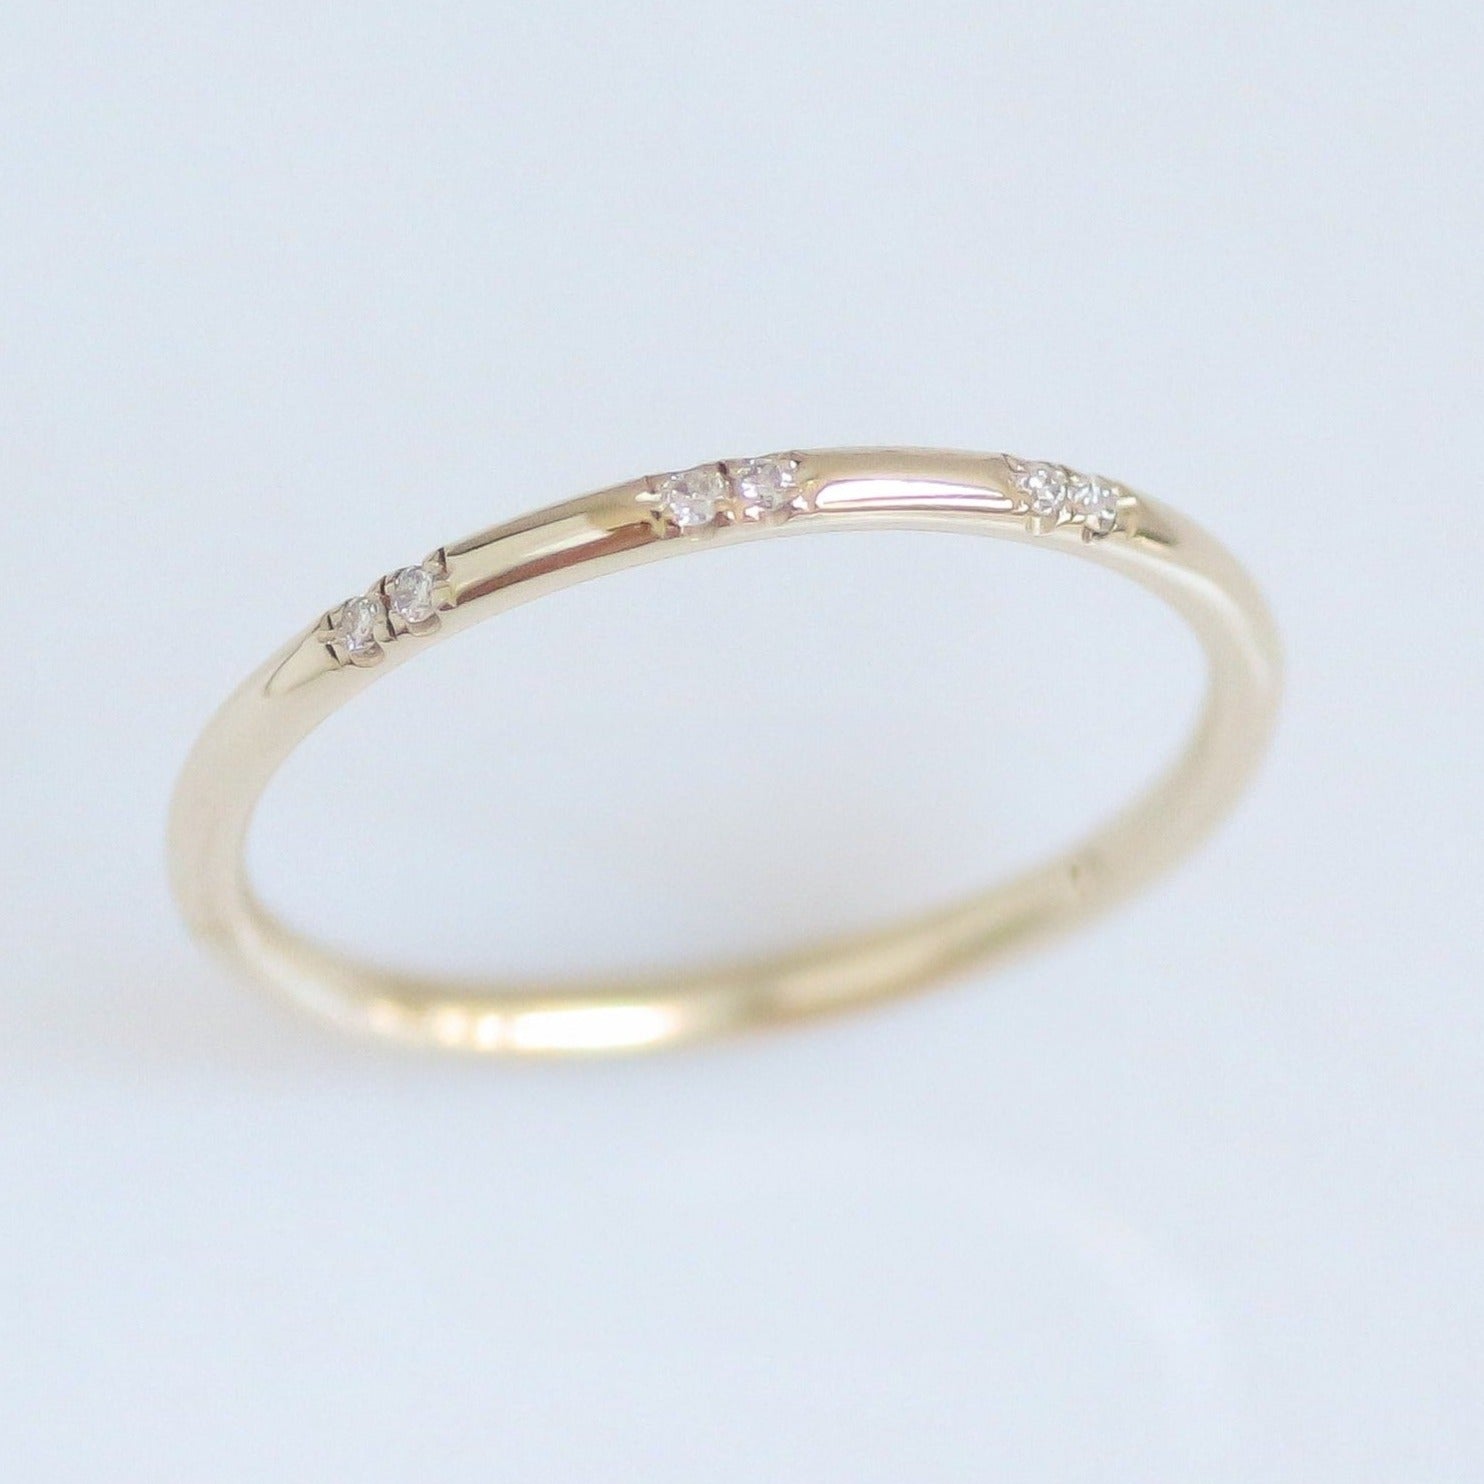 5 Dainty Gold Rings That Will Simply Add To Your Festive Glam In No Time